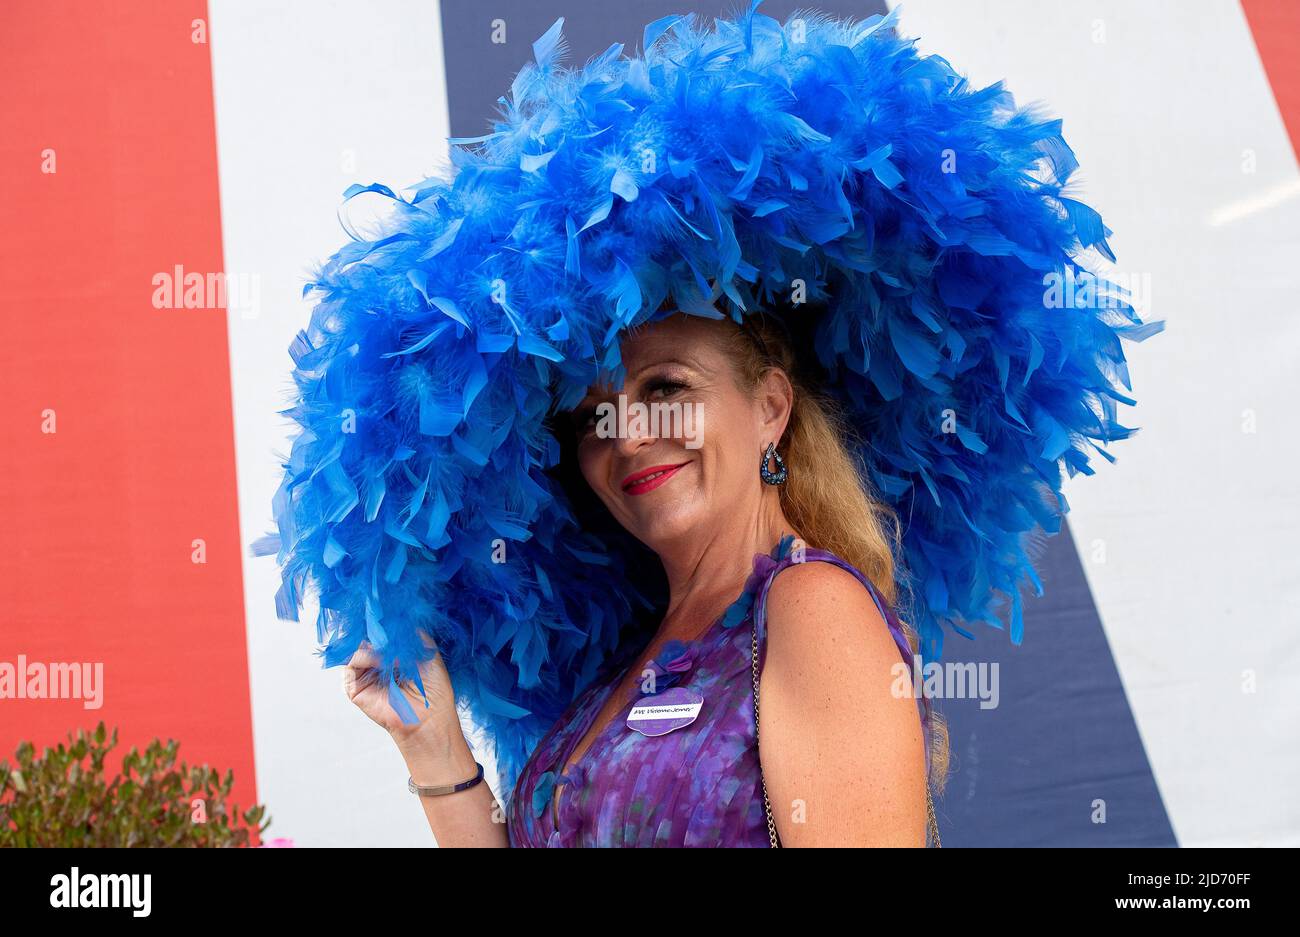 Ascot, Berkshire, UK. 18th June, 2022. Milliner Viv Jenner wears a large blue feathered hat. Racegoers arriving at Royal Ascot were looking very glamourous for the final day of Royal Ascot. After a week of glorious sunshine there were a few spots of rain this morning so the umbrellas were in action for a while. Credit: Maureen McLean/Alamy Live News Stock Photo